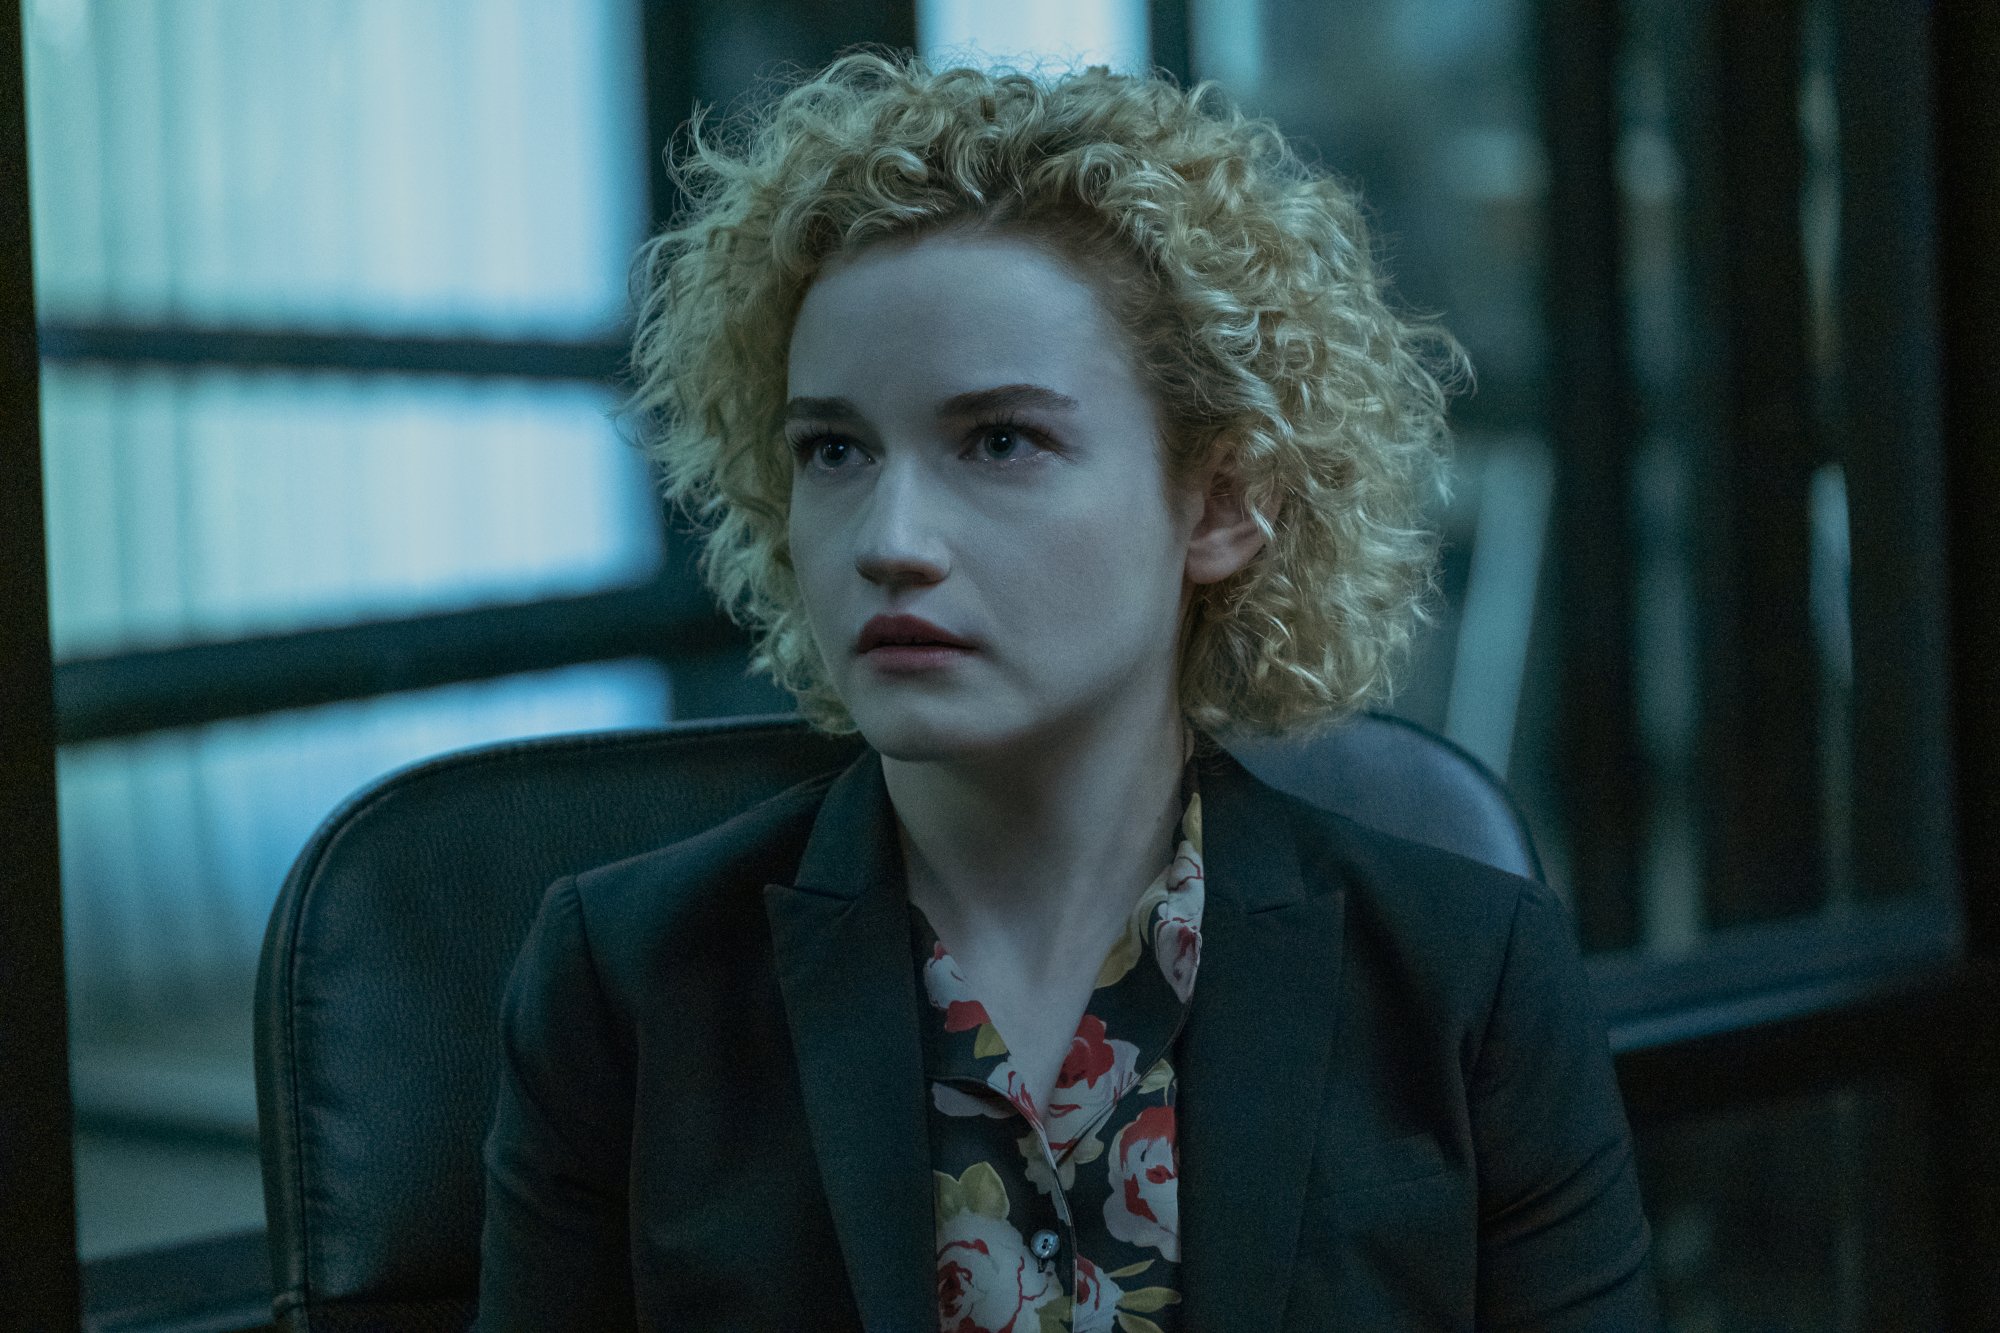 Julia Garner as Ruth Langmore in 'Ozark' Season 3 Episode 5. She's sitting in a desk chair and wearing a black blazer and floral shirt.